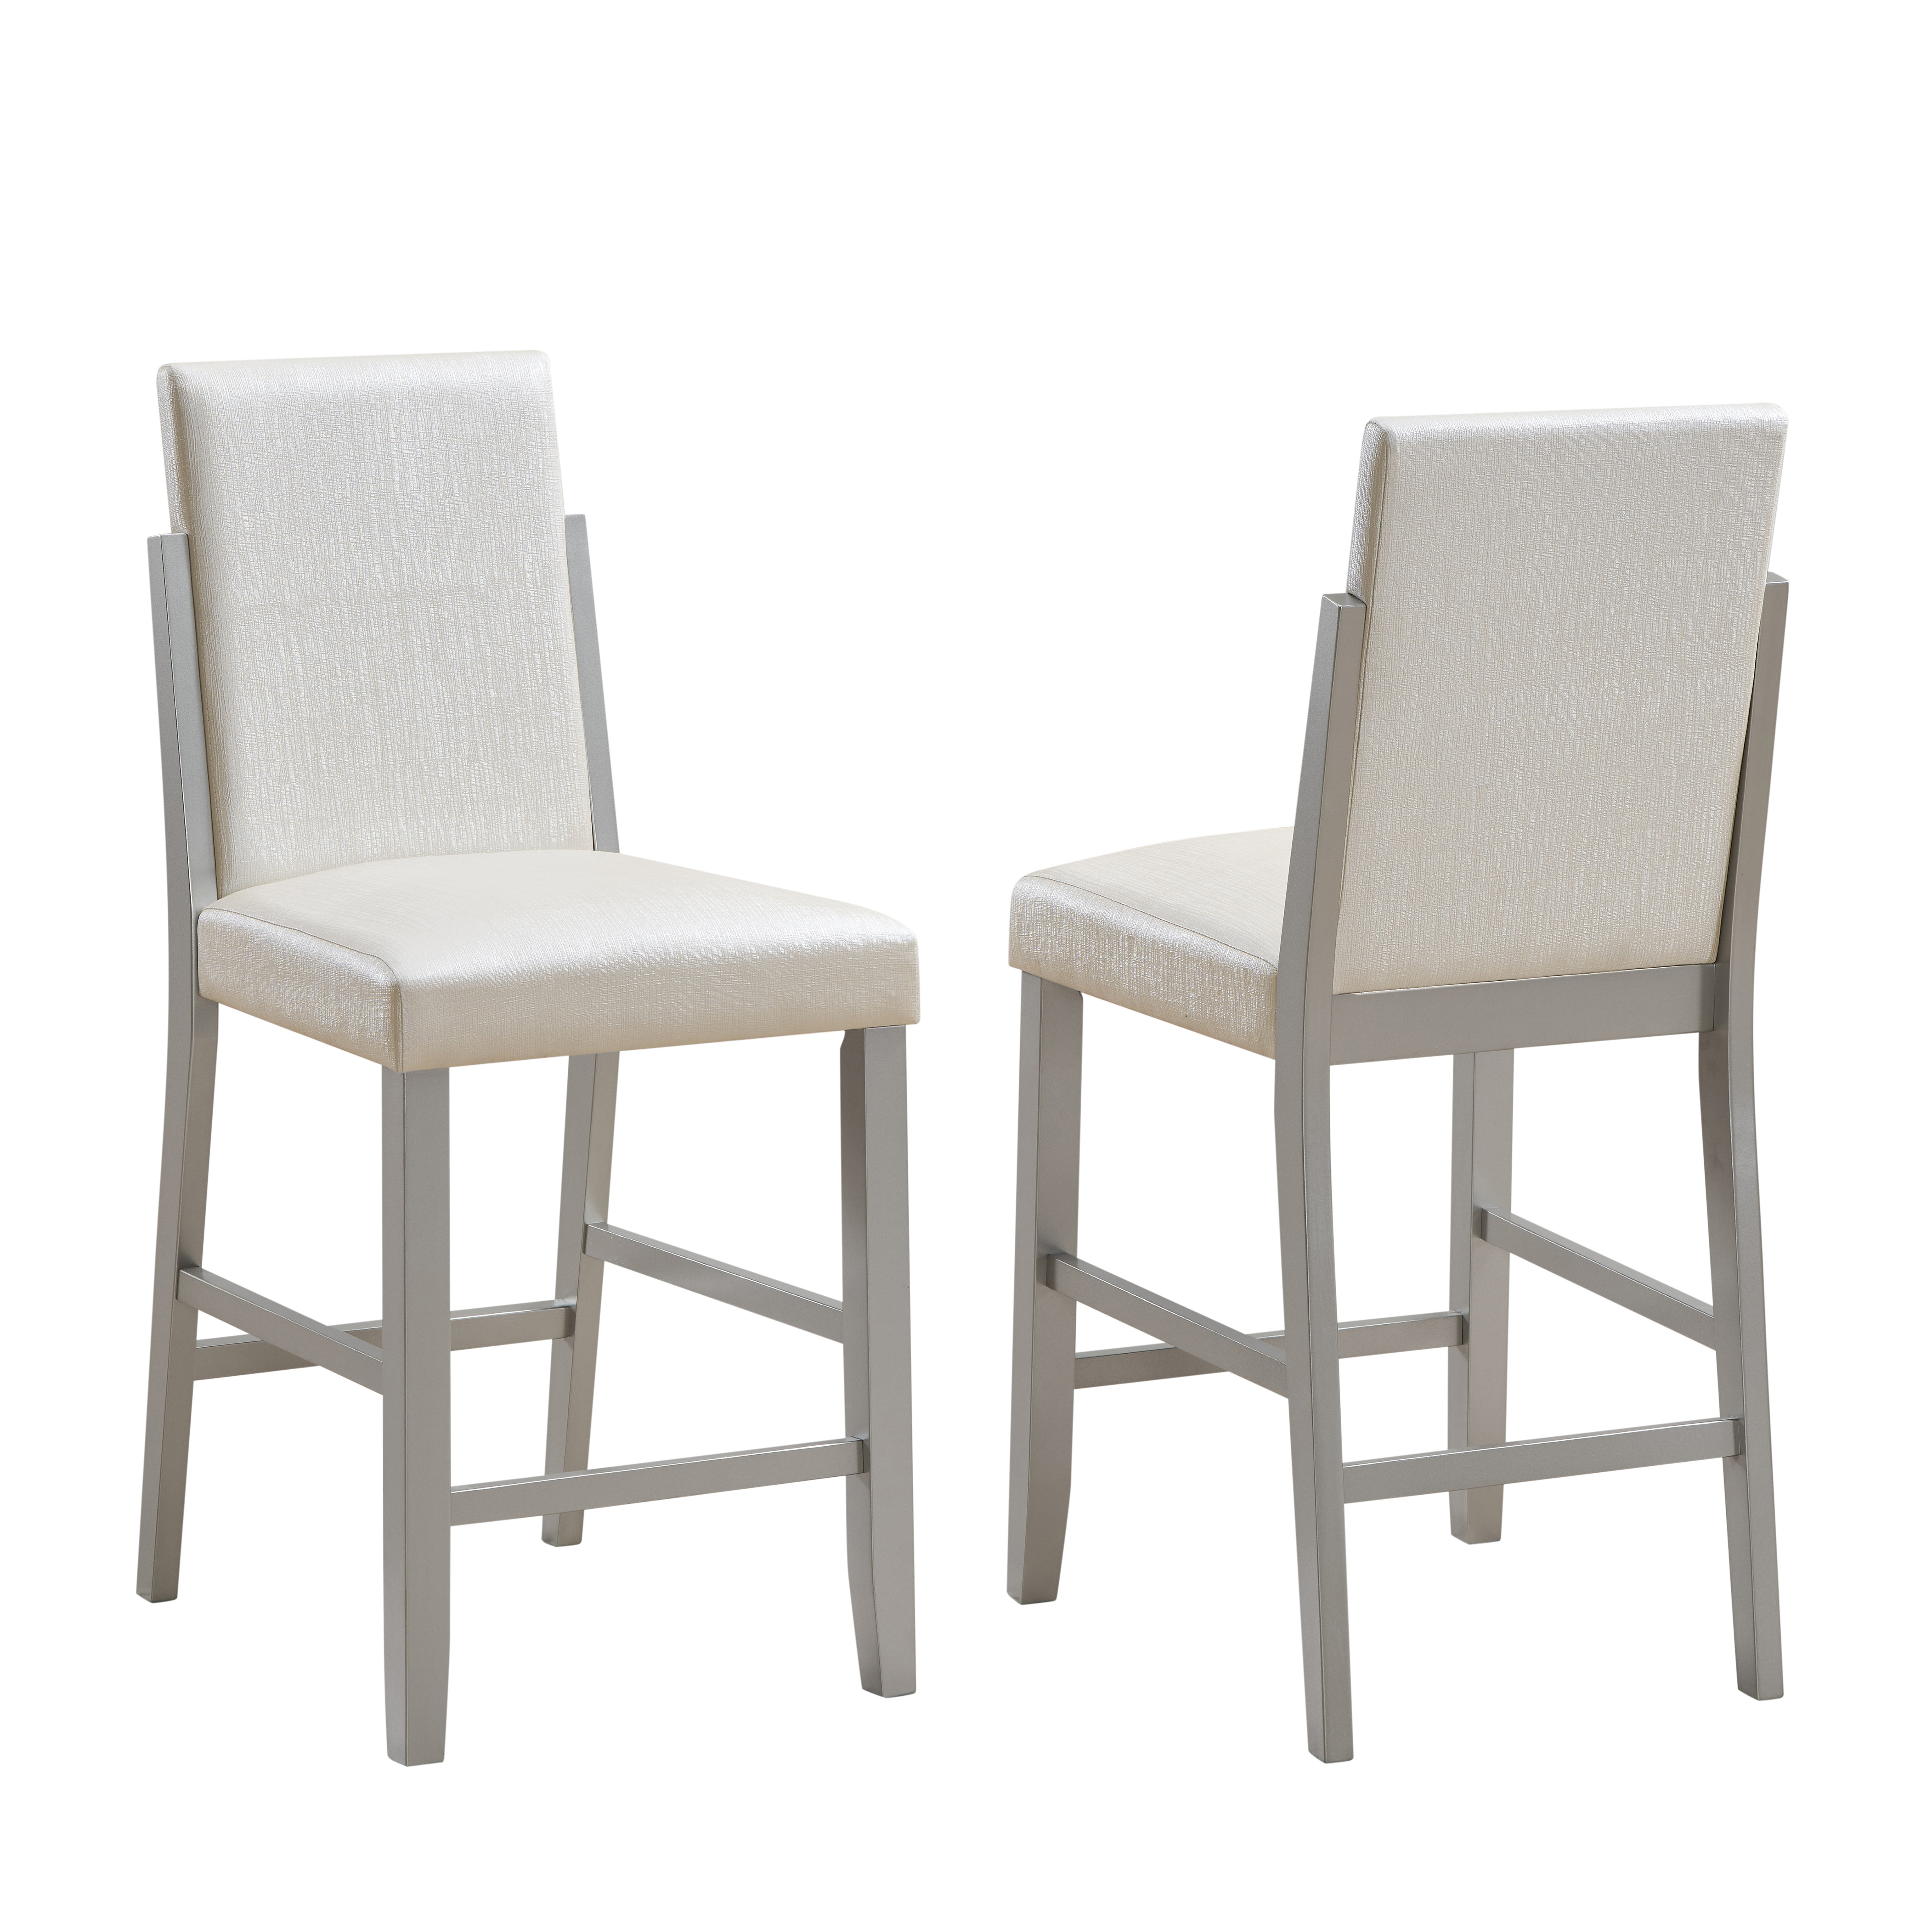 Acelyn Counter Height Stool (White) - Set of 2